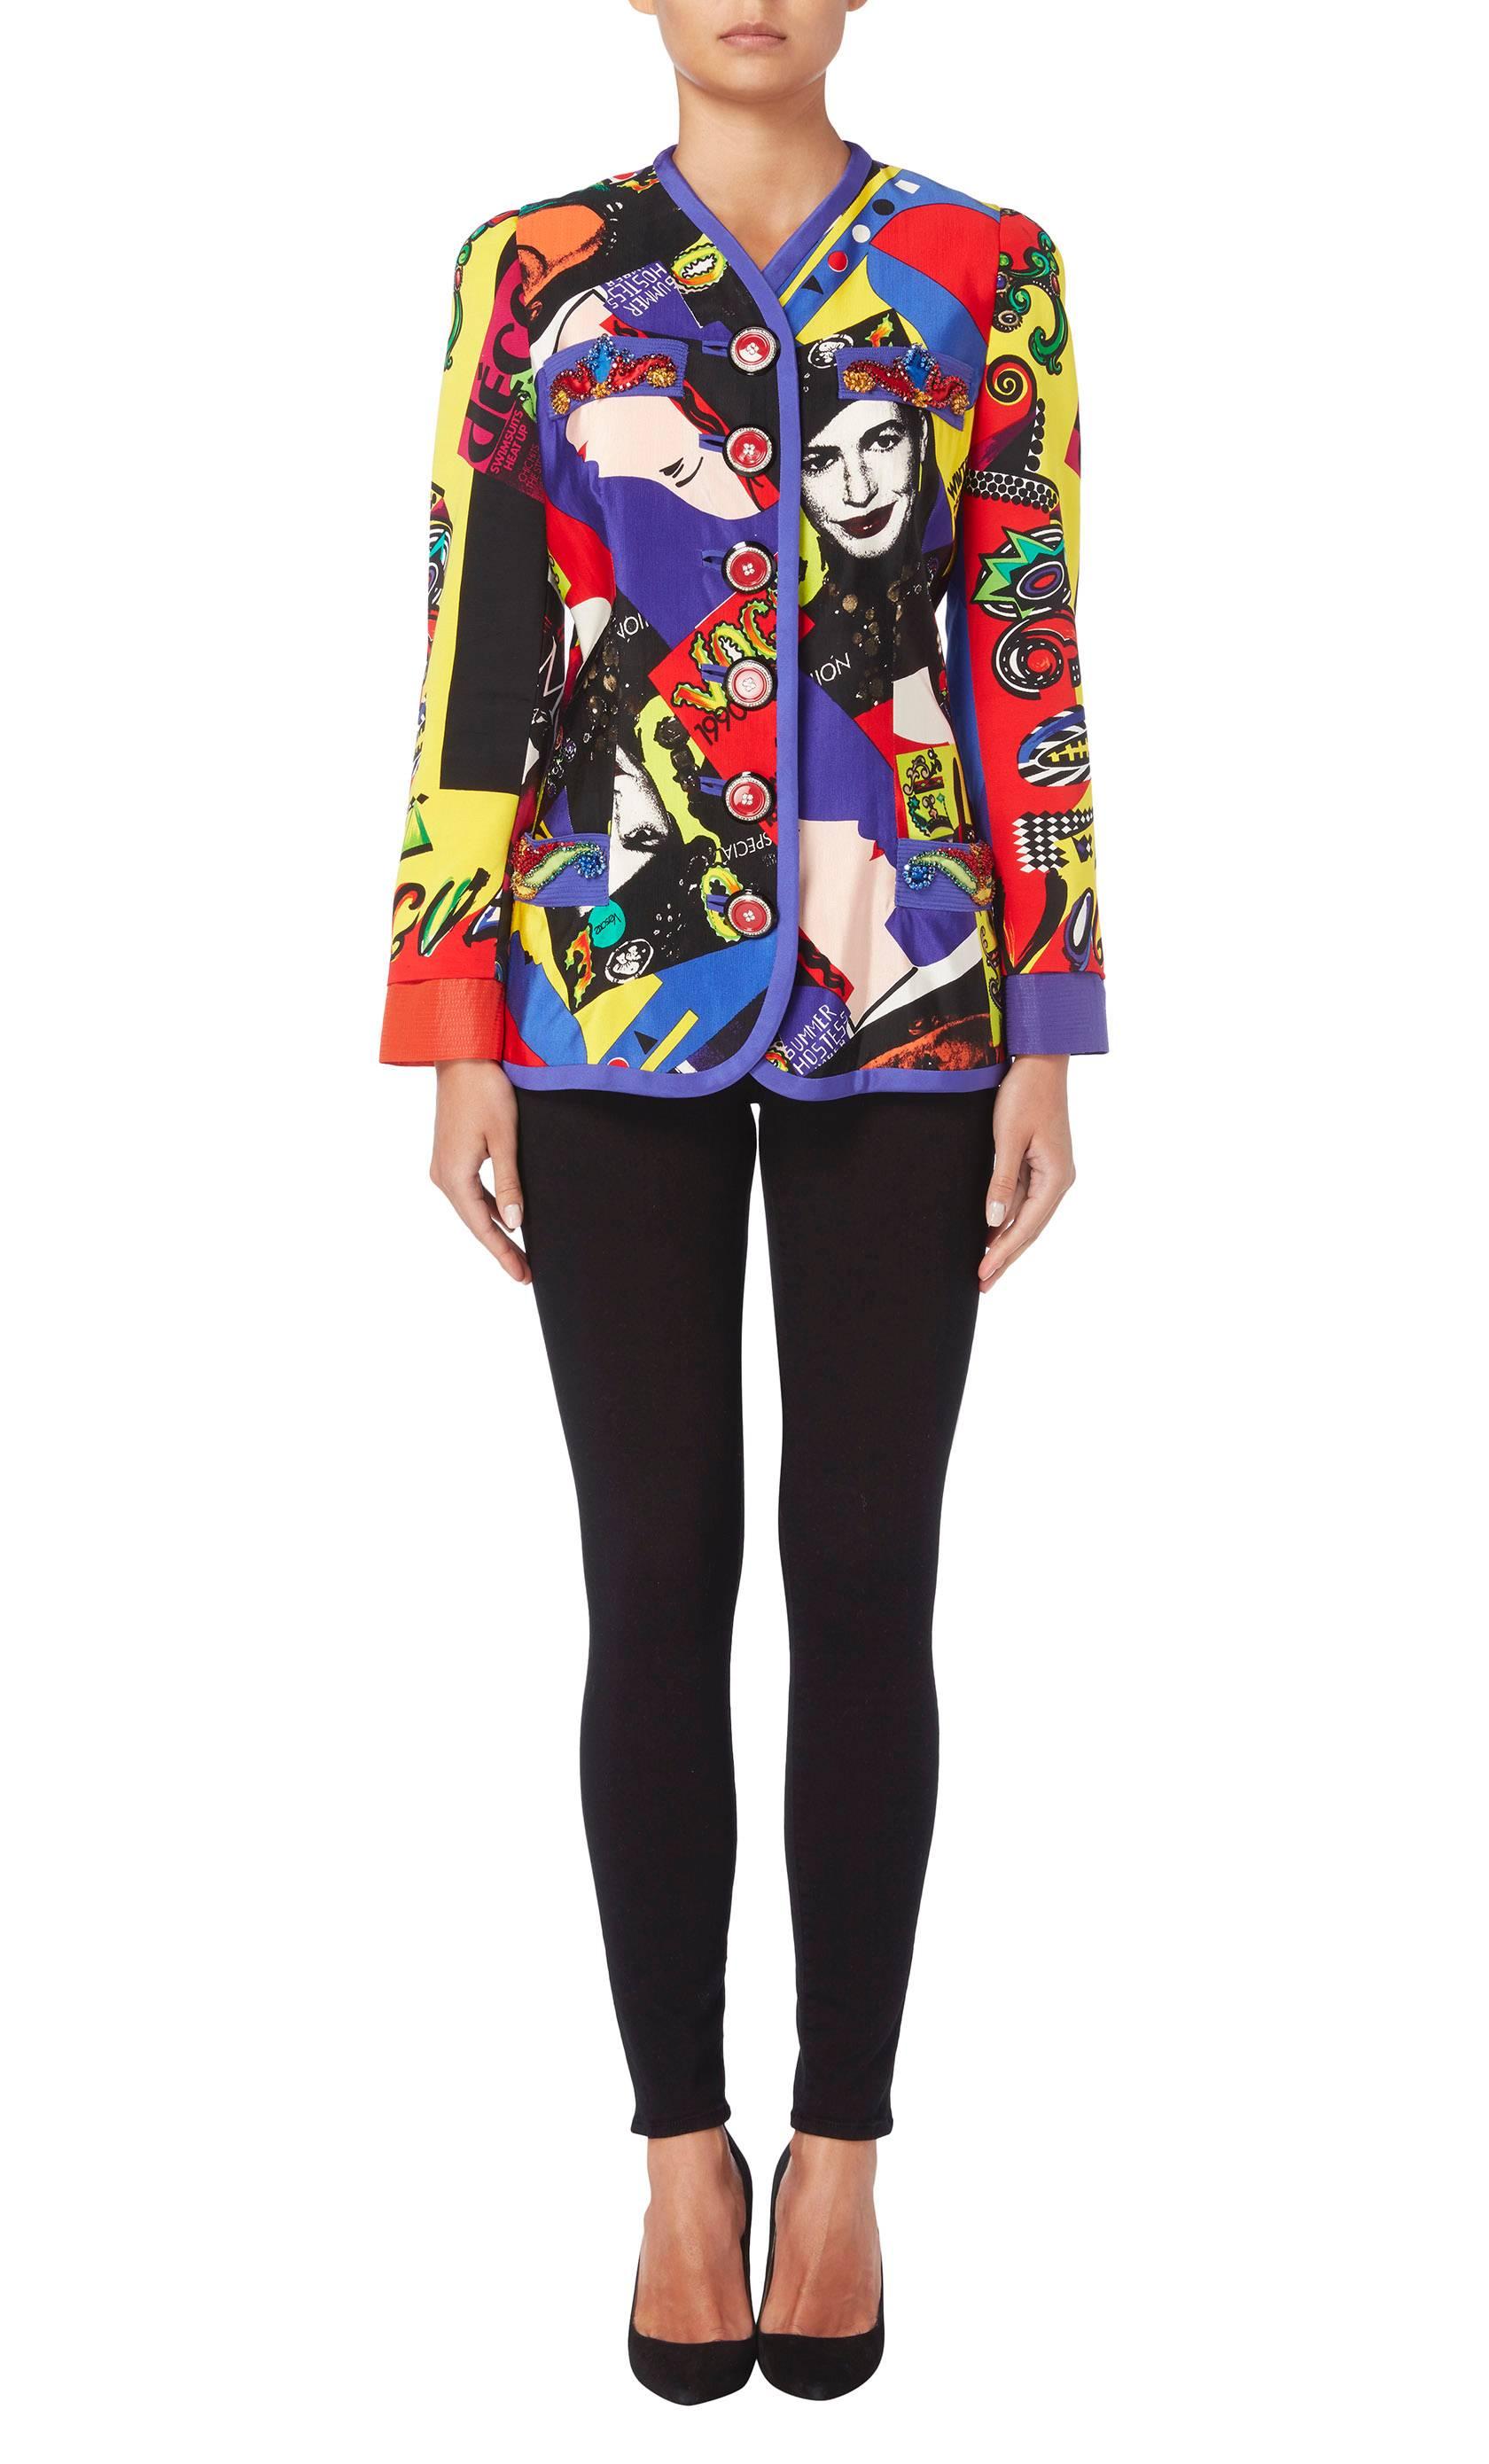 As seen on the Spring/Summer 1991 runway, the identical Gianni Versace jacket was modelled by on Stephanie Seymour and features the iconic ‘Vogue’ print from the collection. Constructed in multicoloured silk, the jacket has a v-neckline and slip